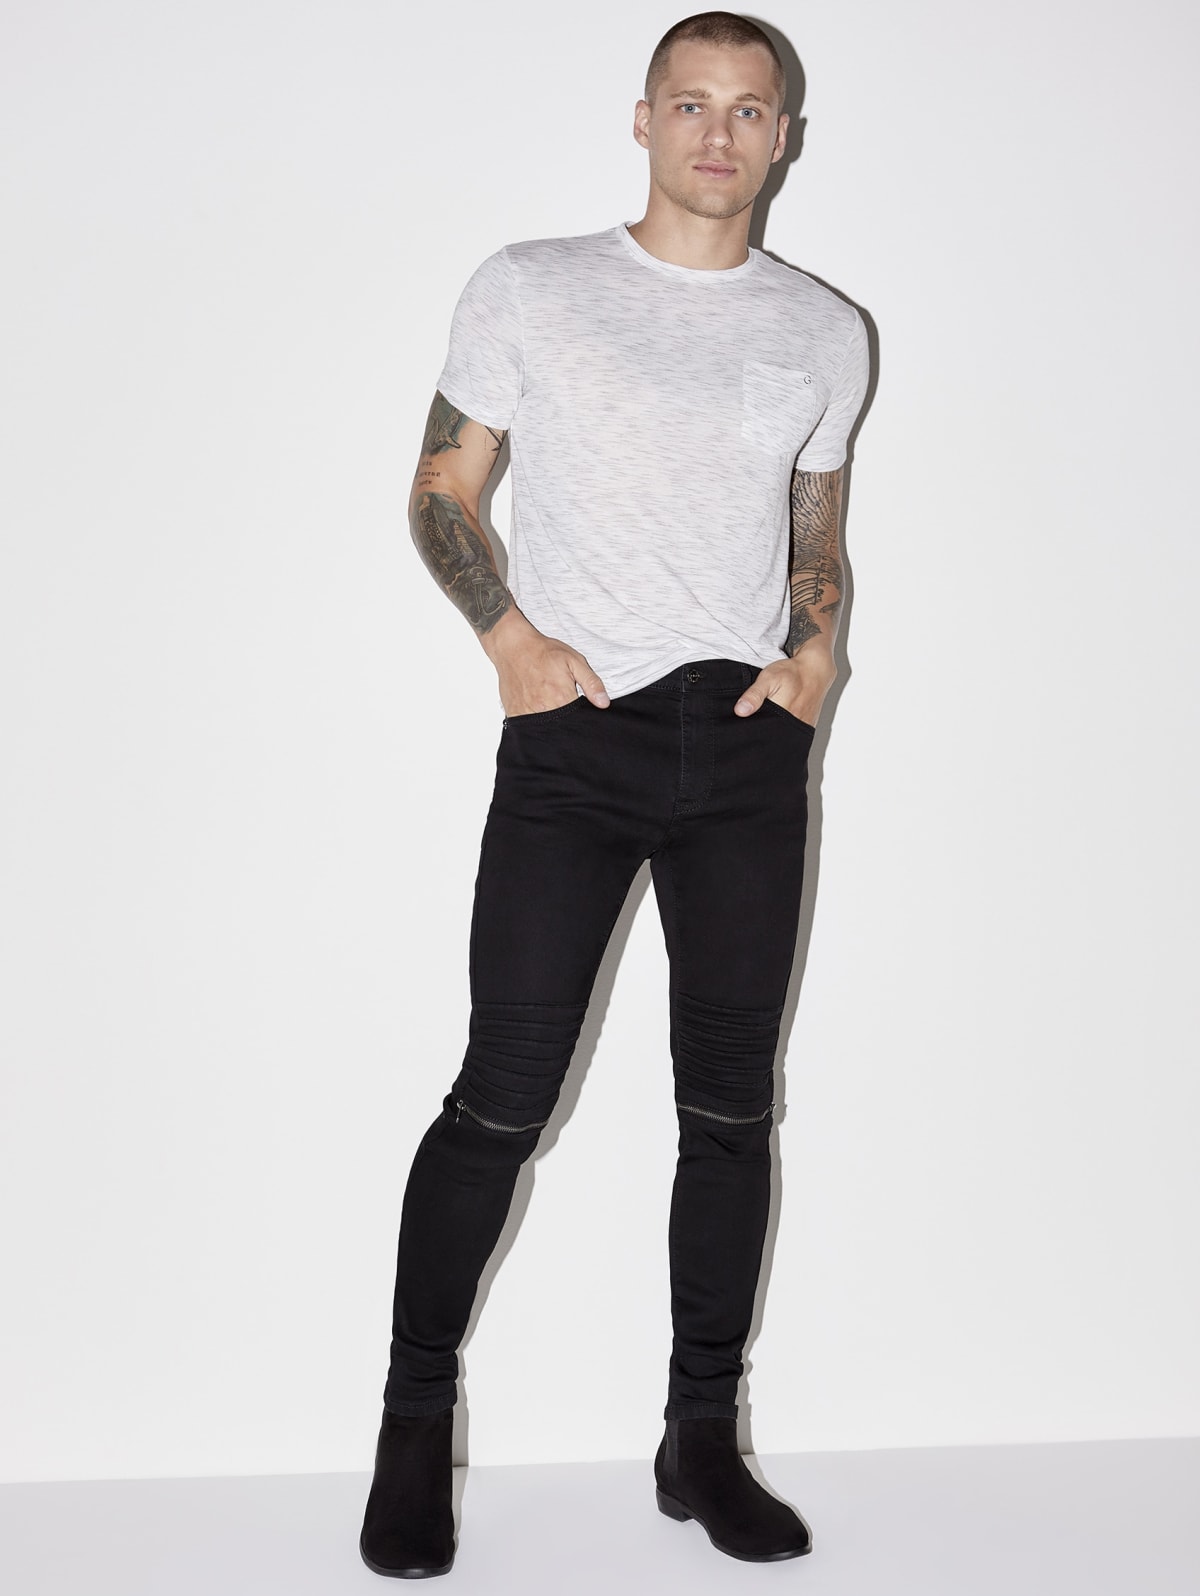 skinny jeans for guys with muscular legs